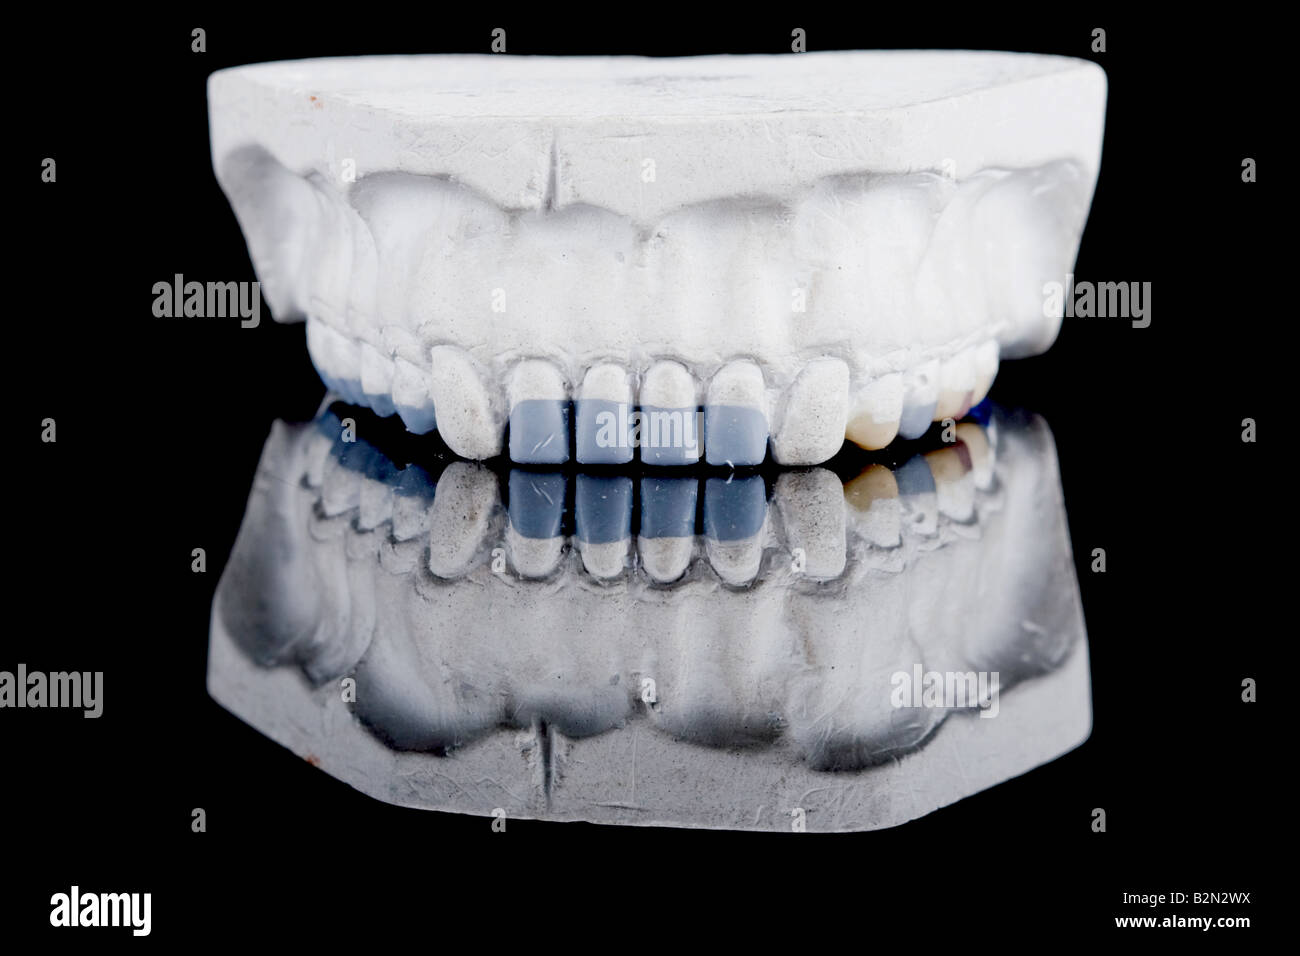 Colorful dental braces or retainer on teeth mold, clay human gums model  Stock Photo - Alamy